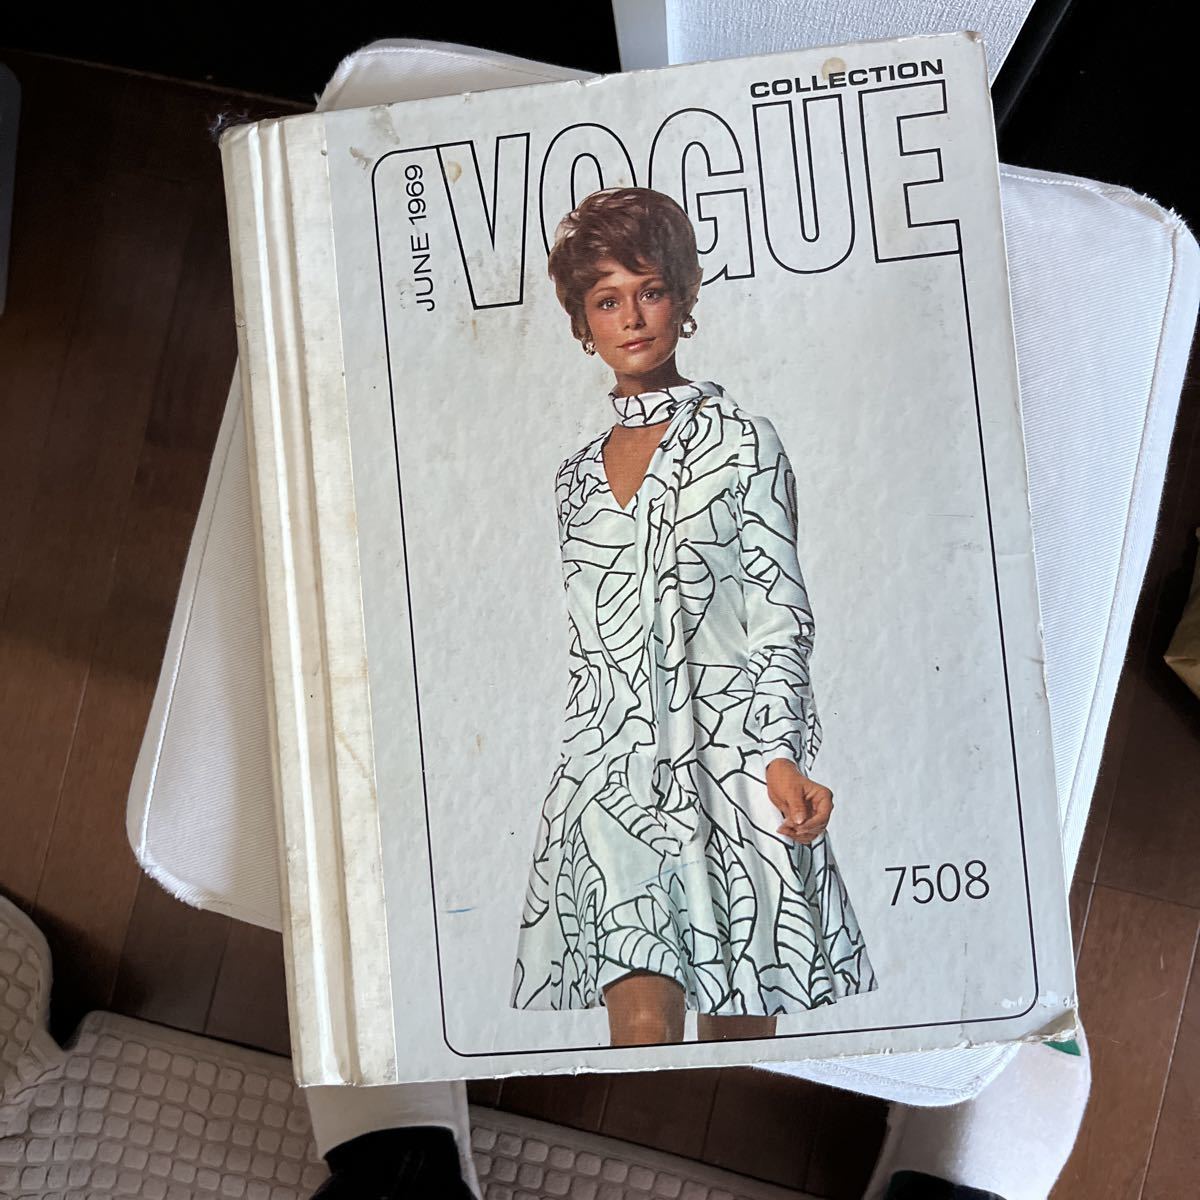 VOGUE1969 year collection book Vogue meido in USA New York Vintage Old Vintage book materials 